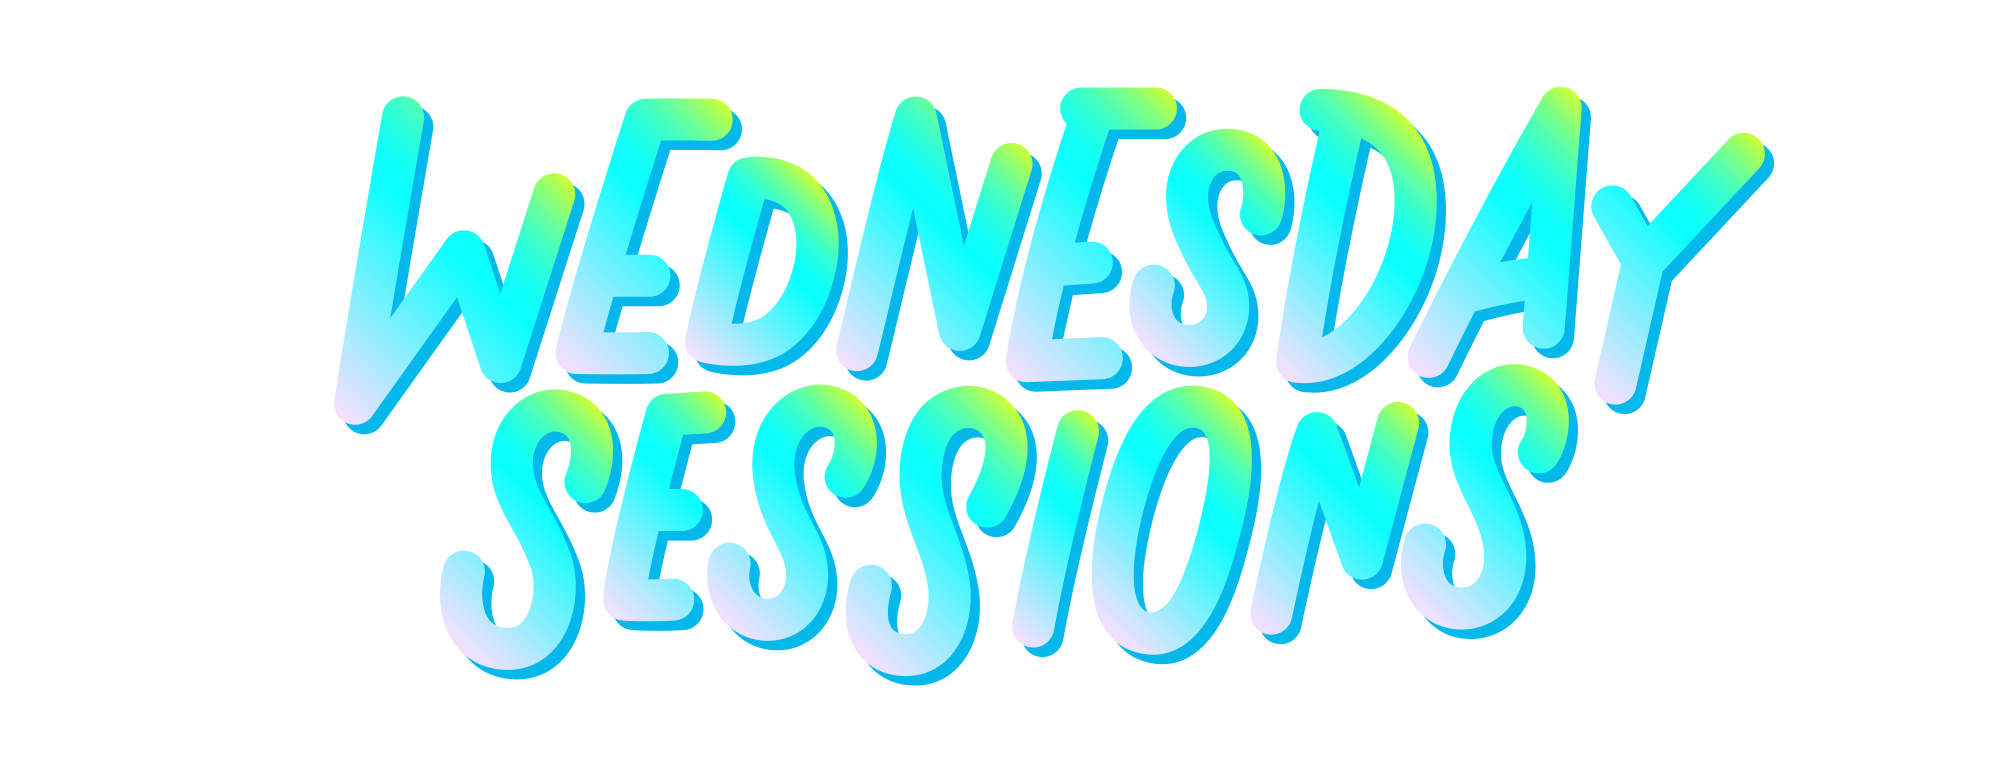 Wednesday Sessions: Semester Two